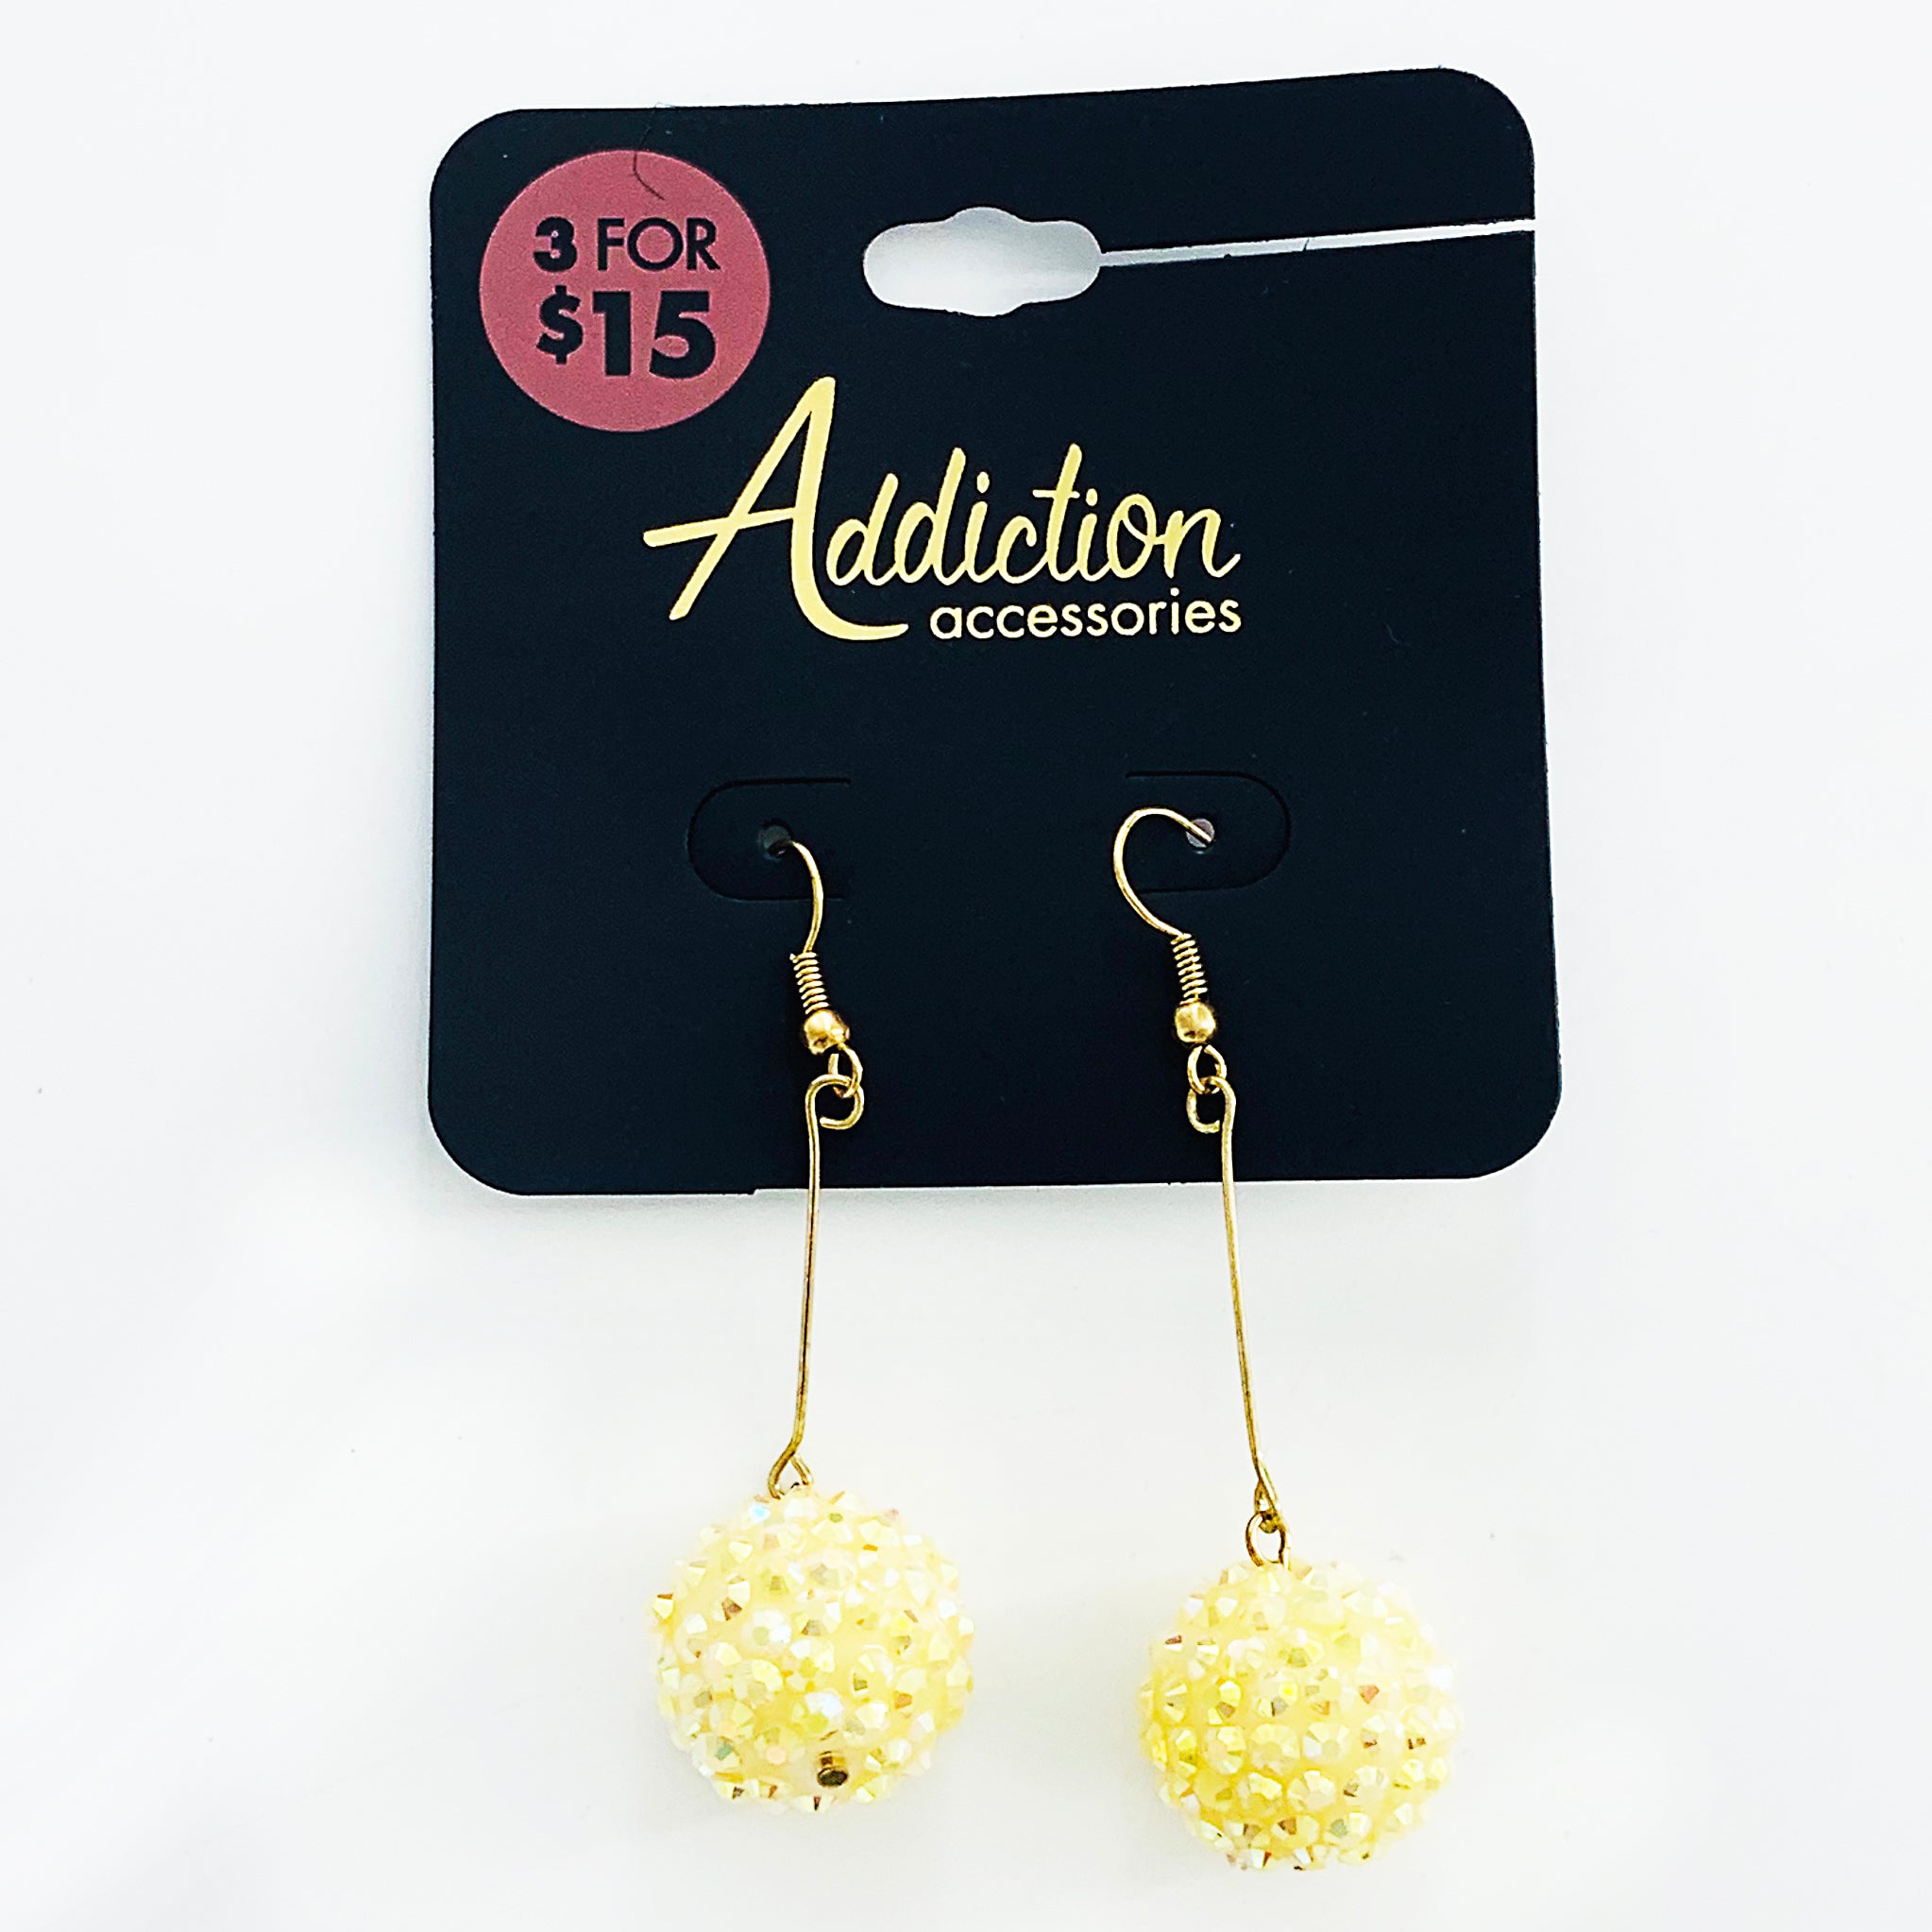 Sparkly yellow ball earrings